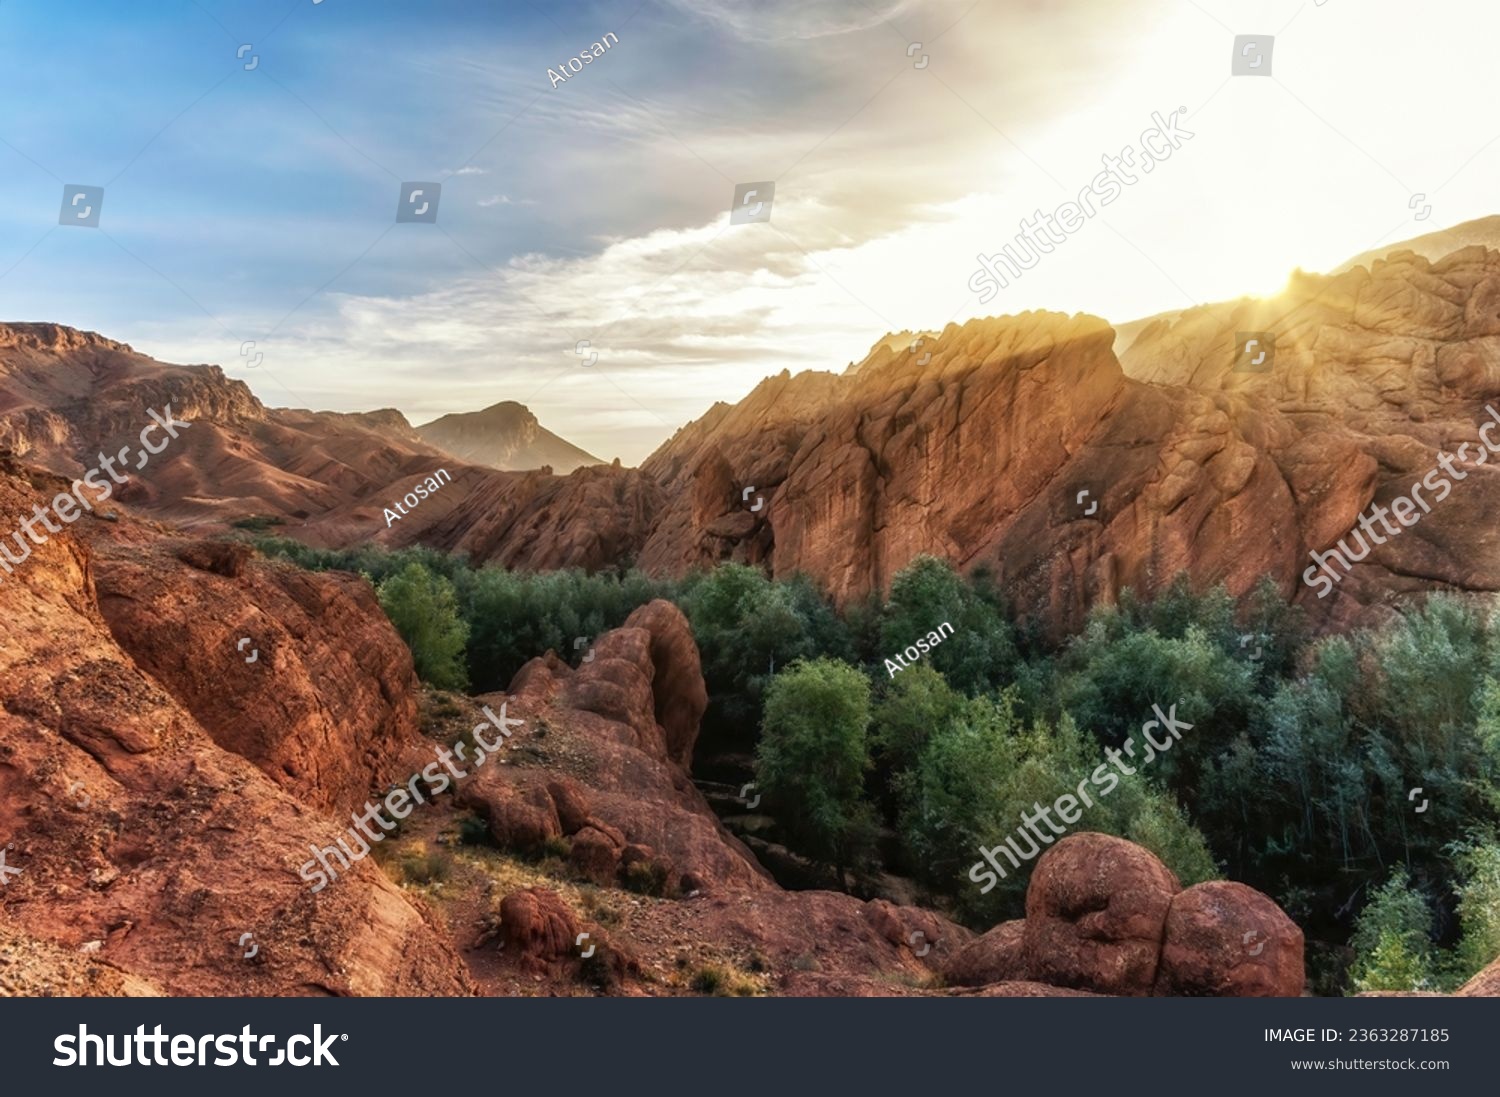 Mountain ridge called Monkey Fingers or Monkey paws in Dades gorge, Atlas Mountains, Morocco., Scenic tourist walking trail. Vacation in Morocco. #2363287185